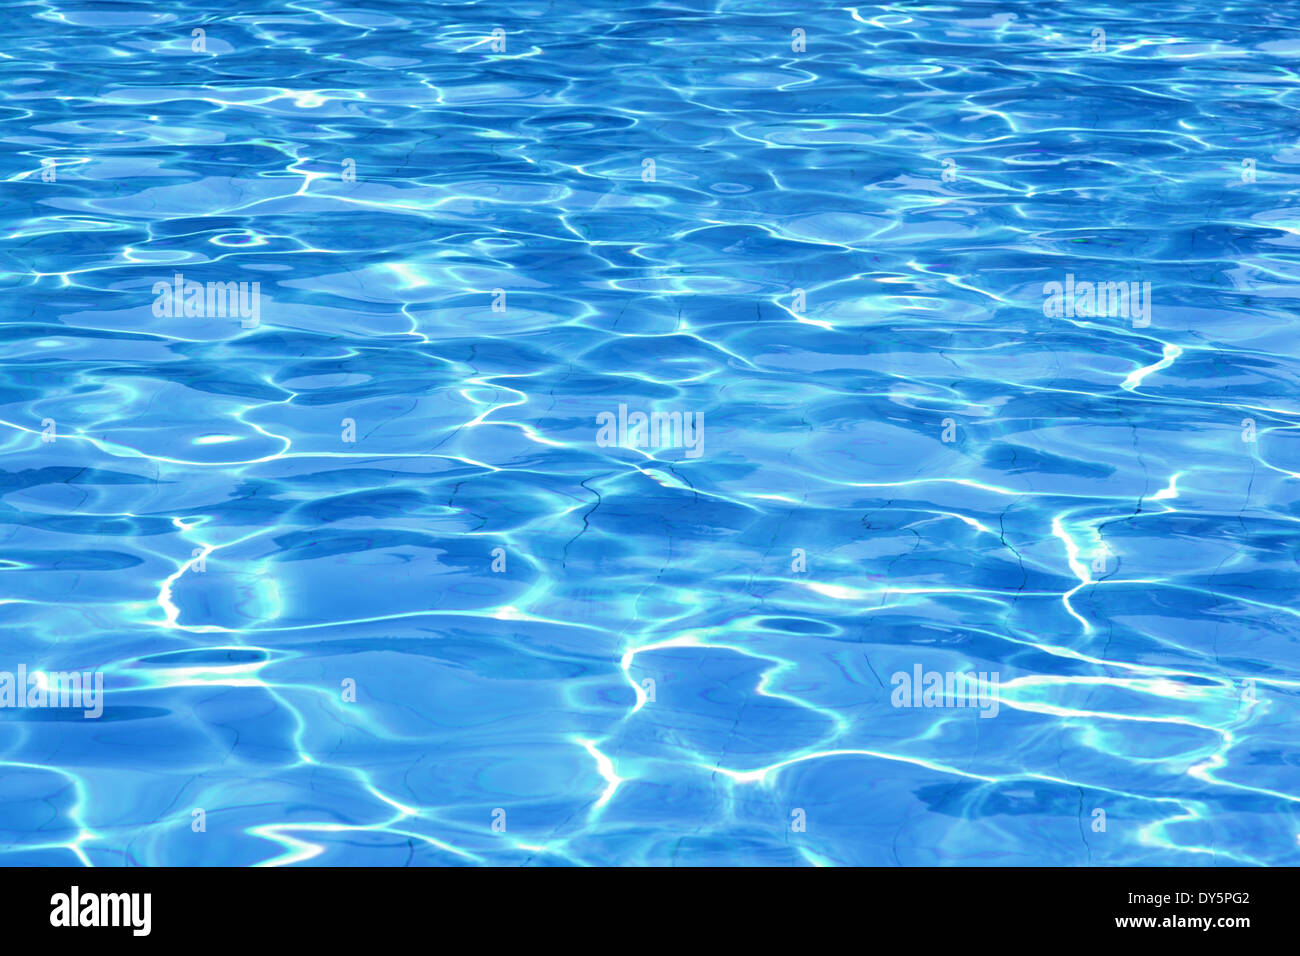 Swimming pool water surface Stock Photo